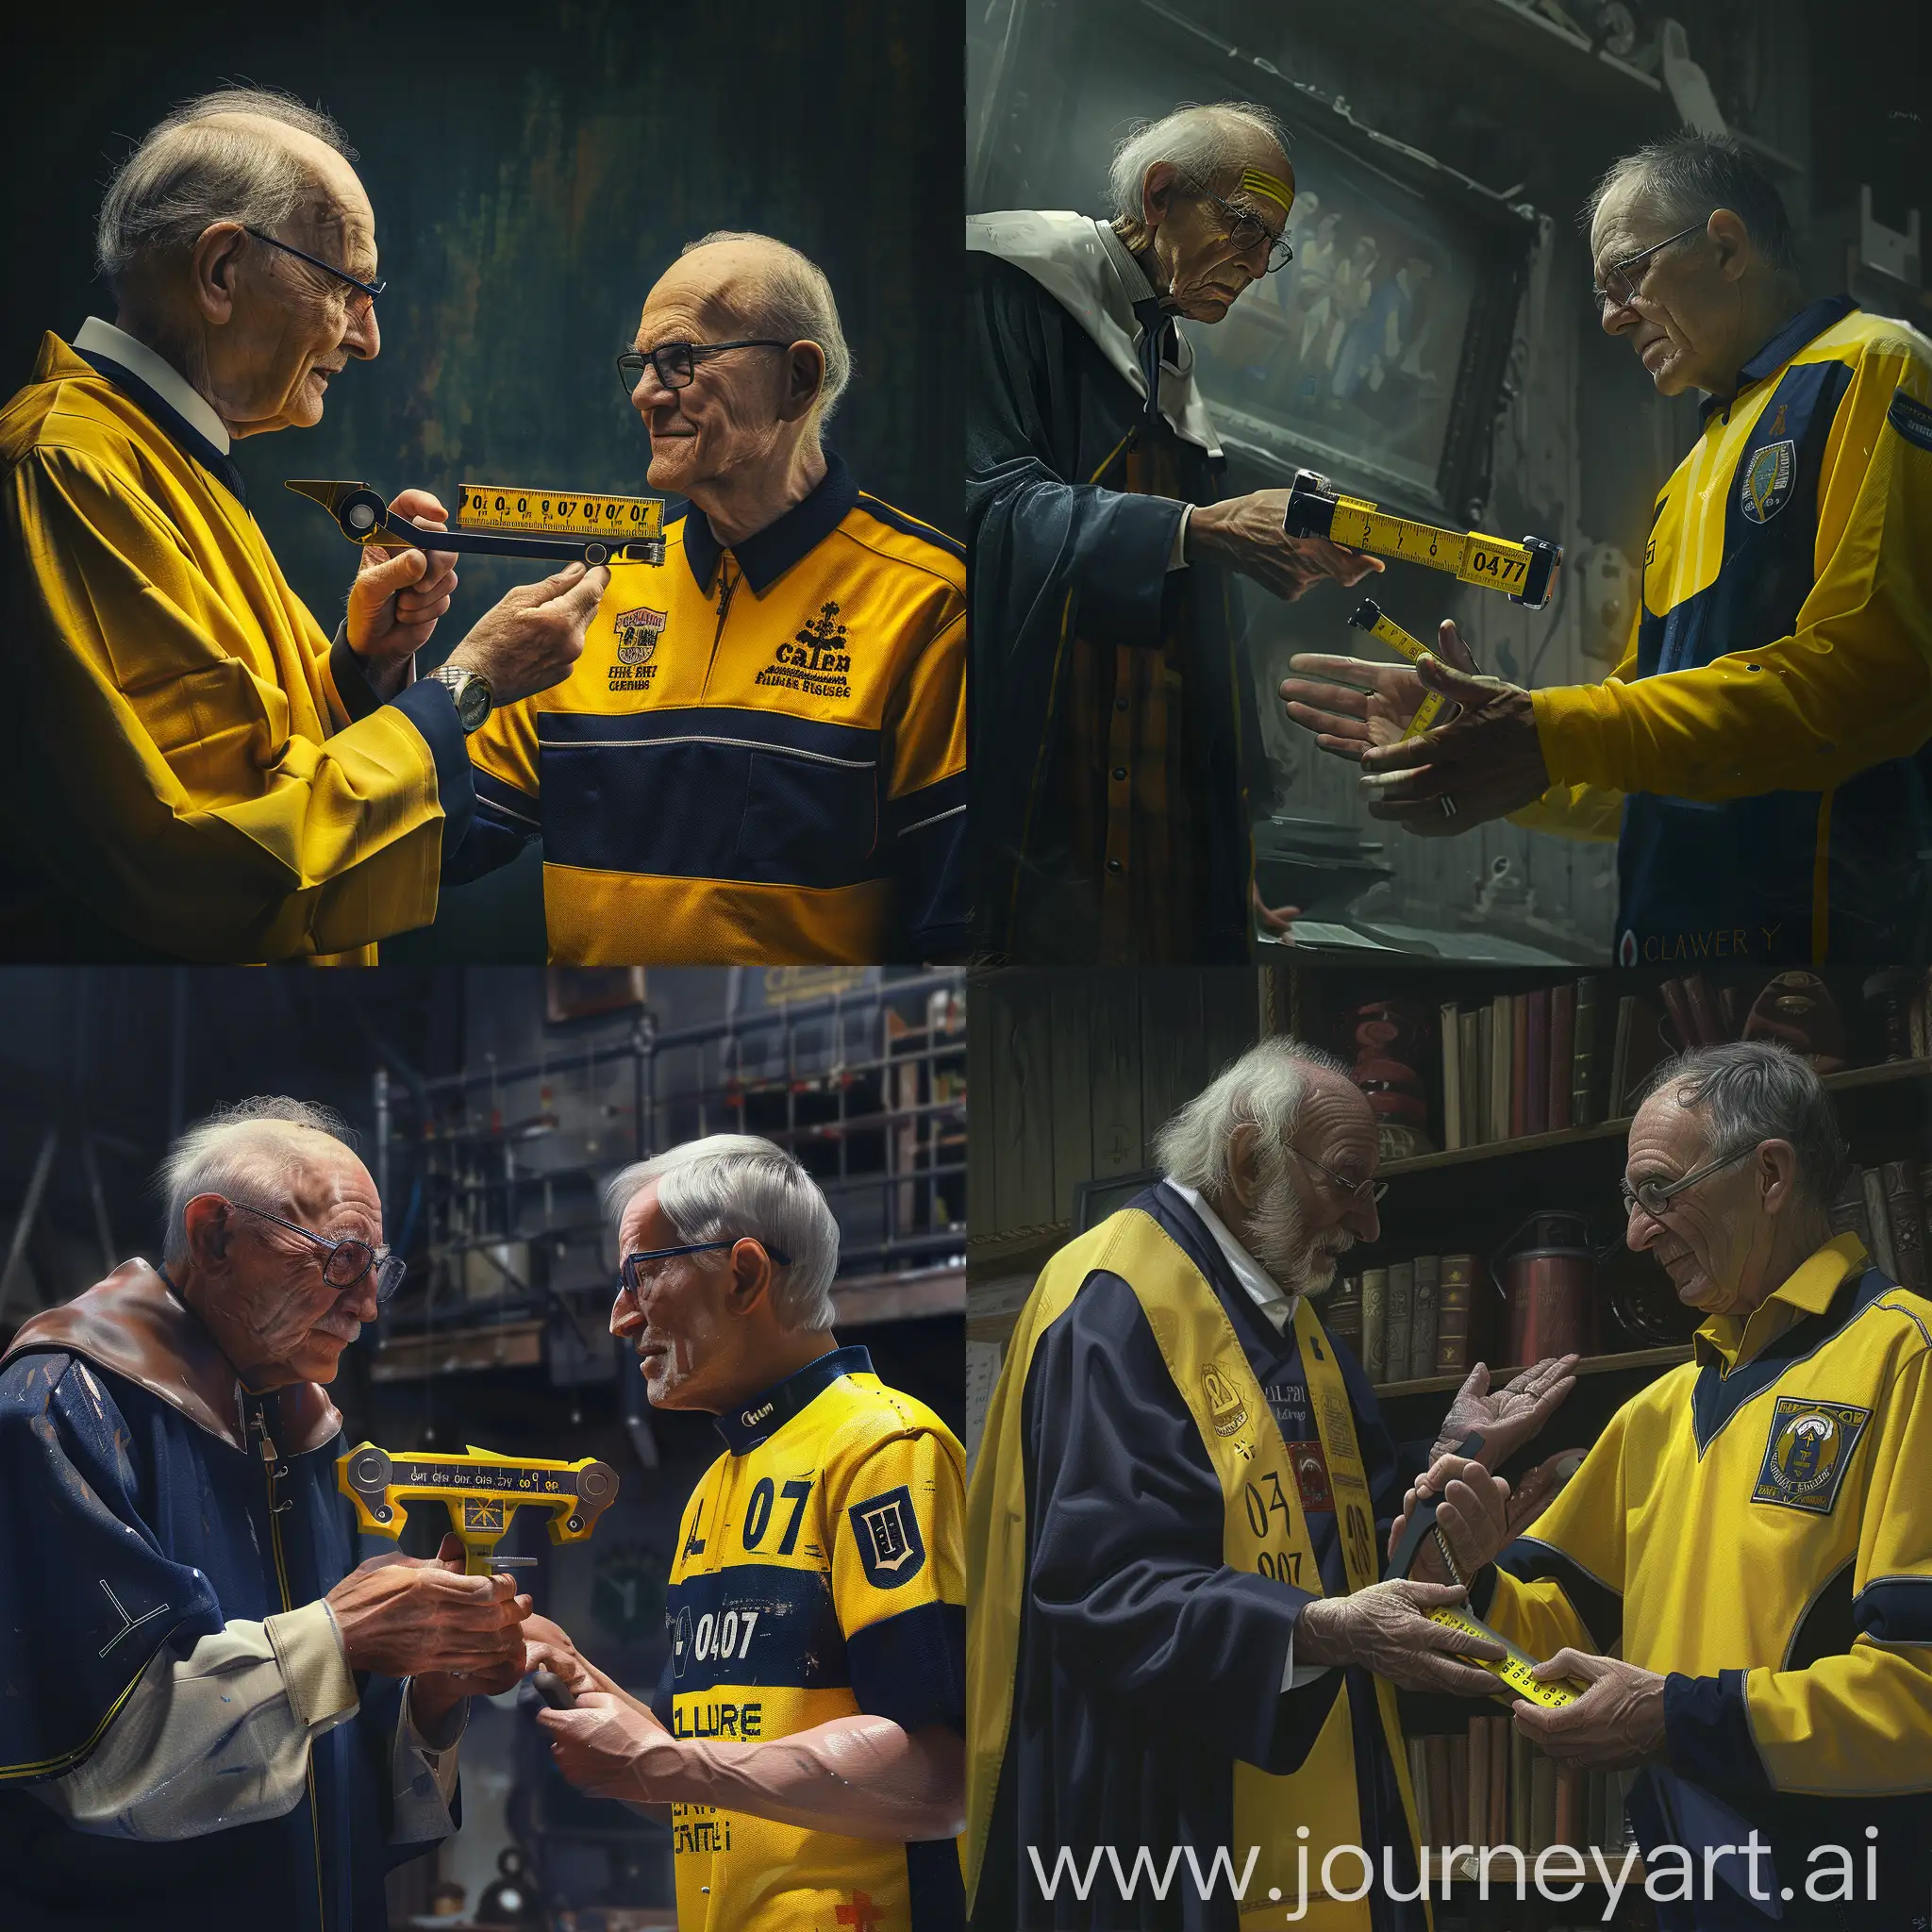 Elderly-Clergyman-Presents-a-Caliper-to-a-Man-in-Yellow-and-Navy-Jersey